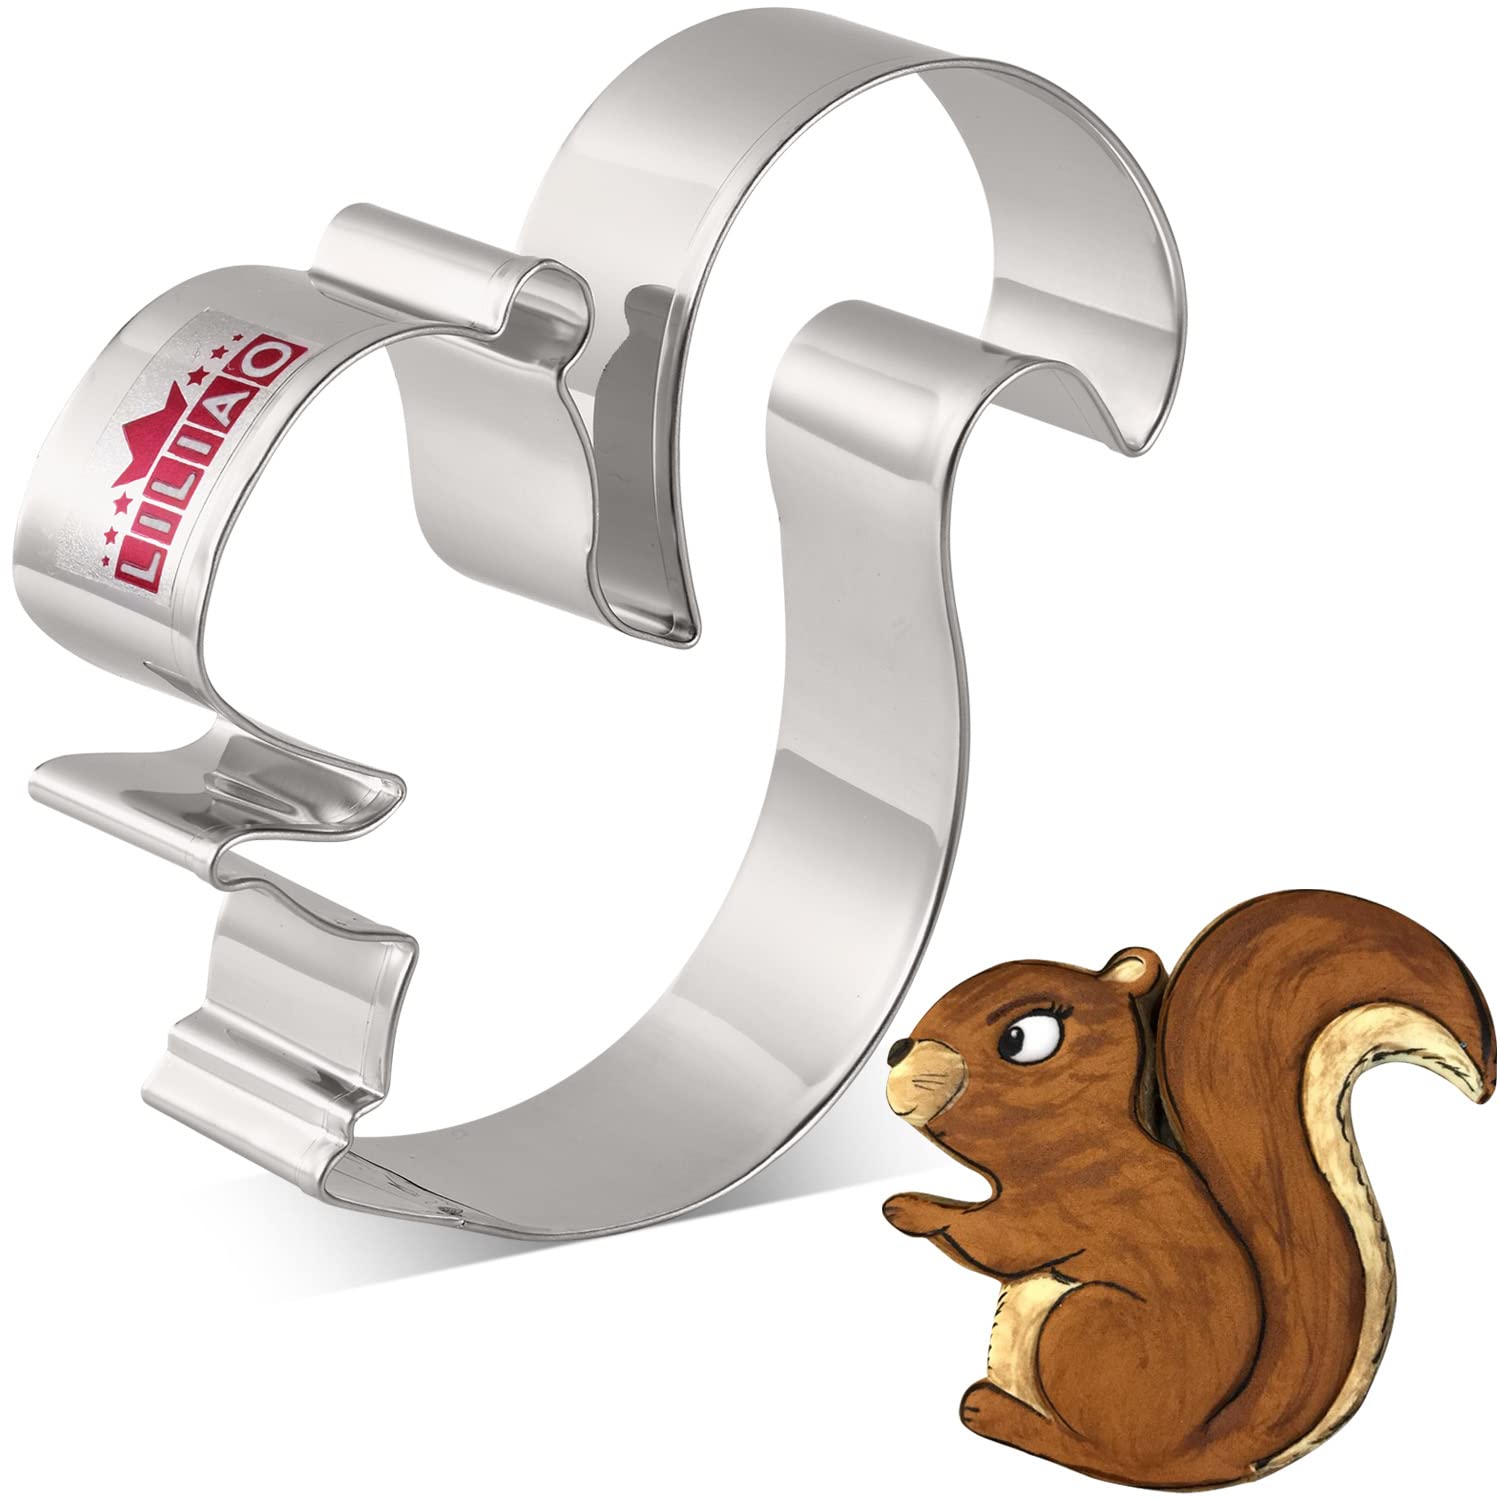 LILIAO Squirrel Cookie Cutter - 3.8 x 4 inches - Woodland Animal Biscuit and Fondant Cutters - Stainless Steel